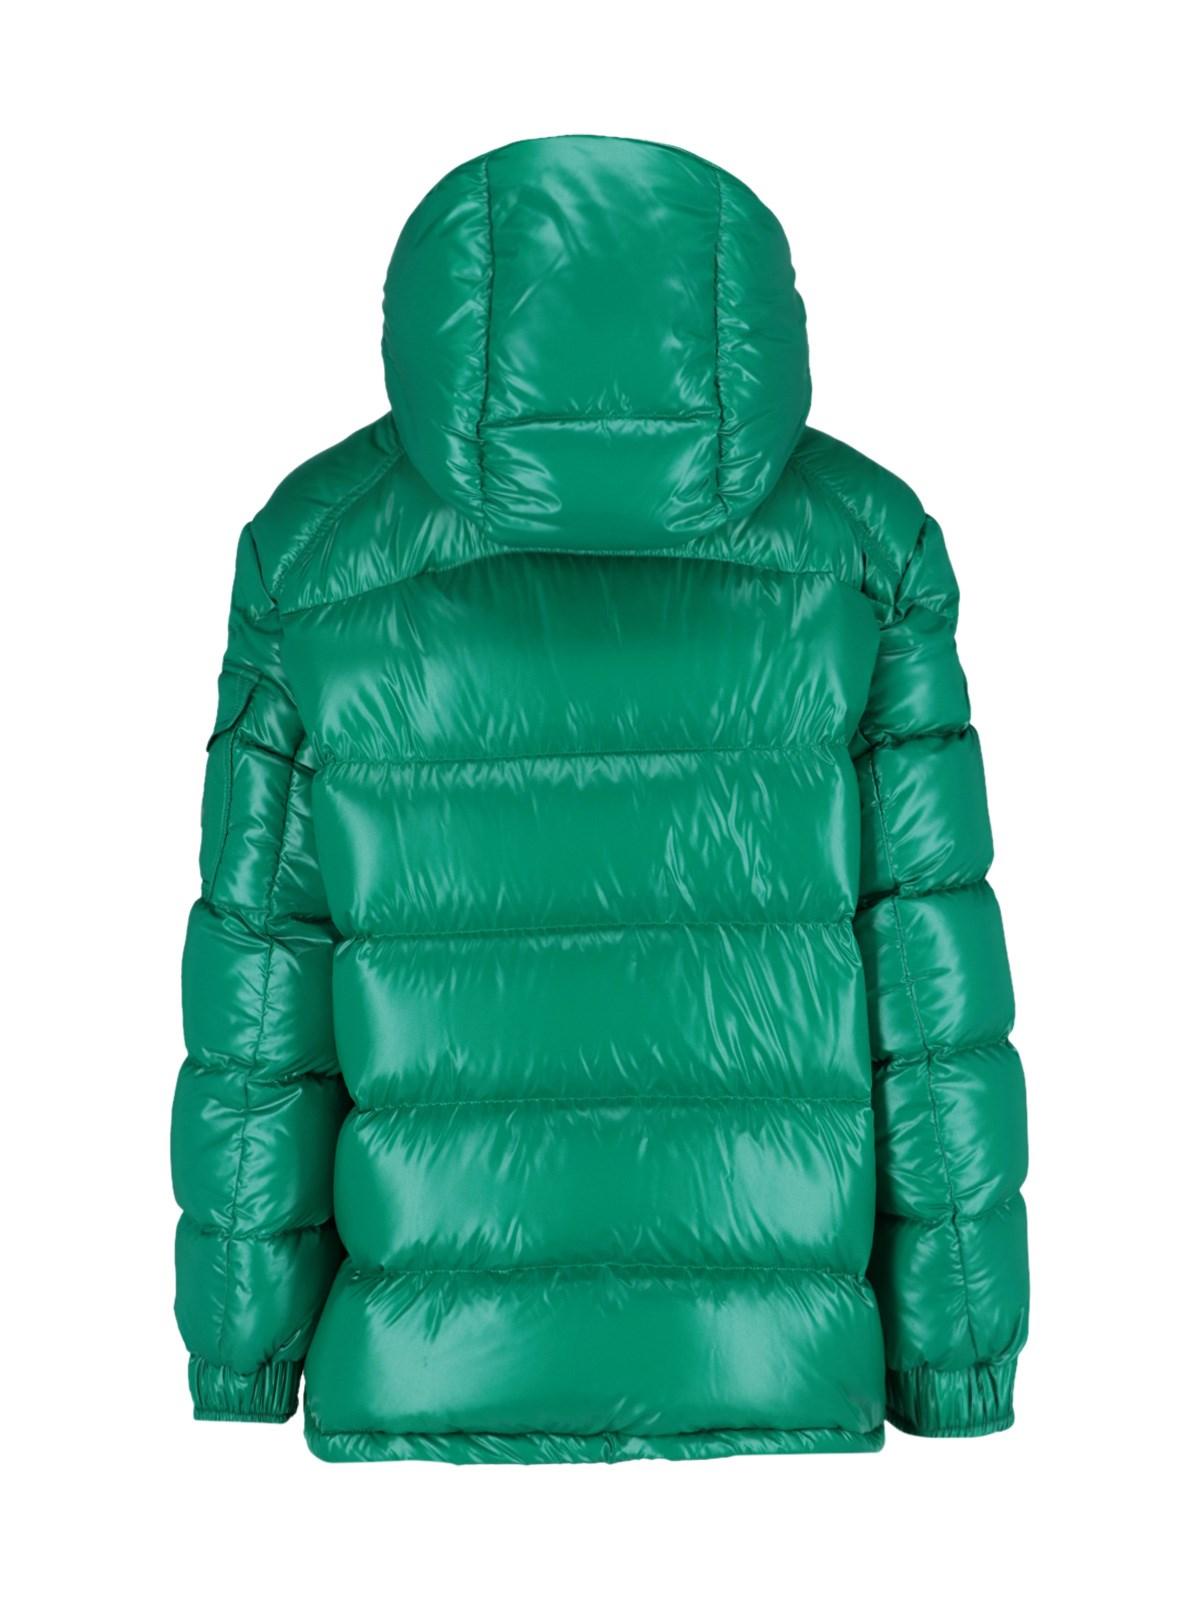 Moncler 'maire' Short Down Jacket in Green | Lyst